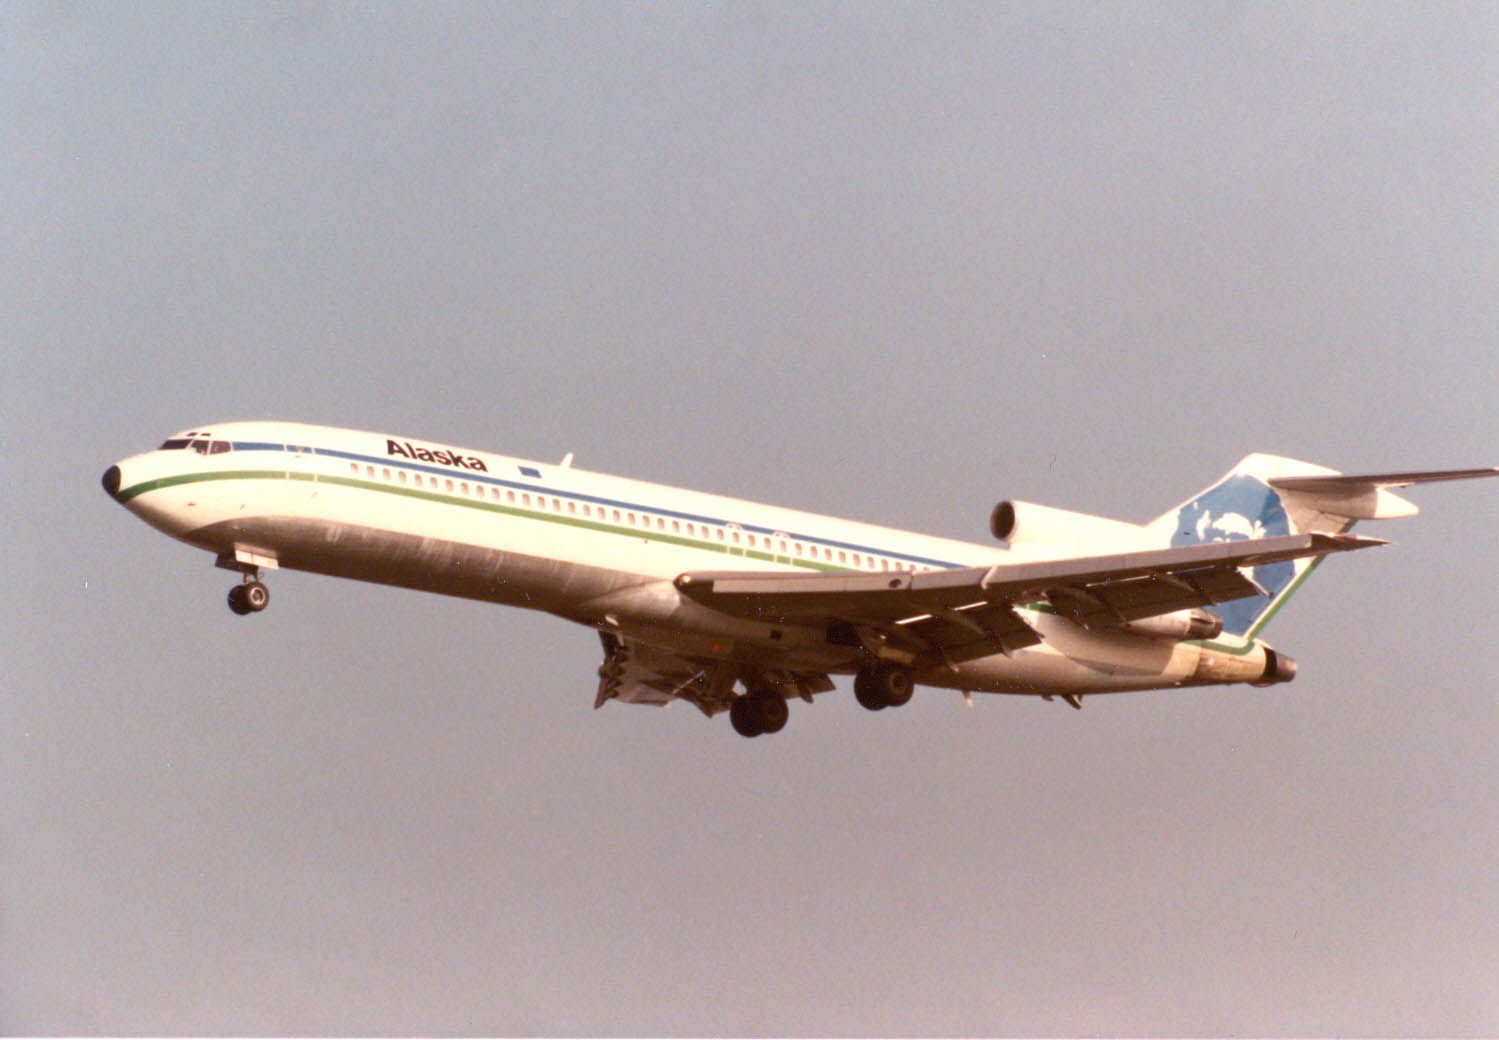 A Boeing 727 in Alaska Airlines livery